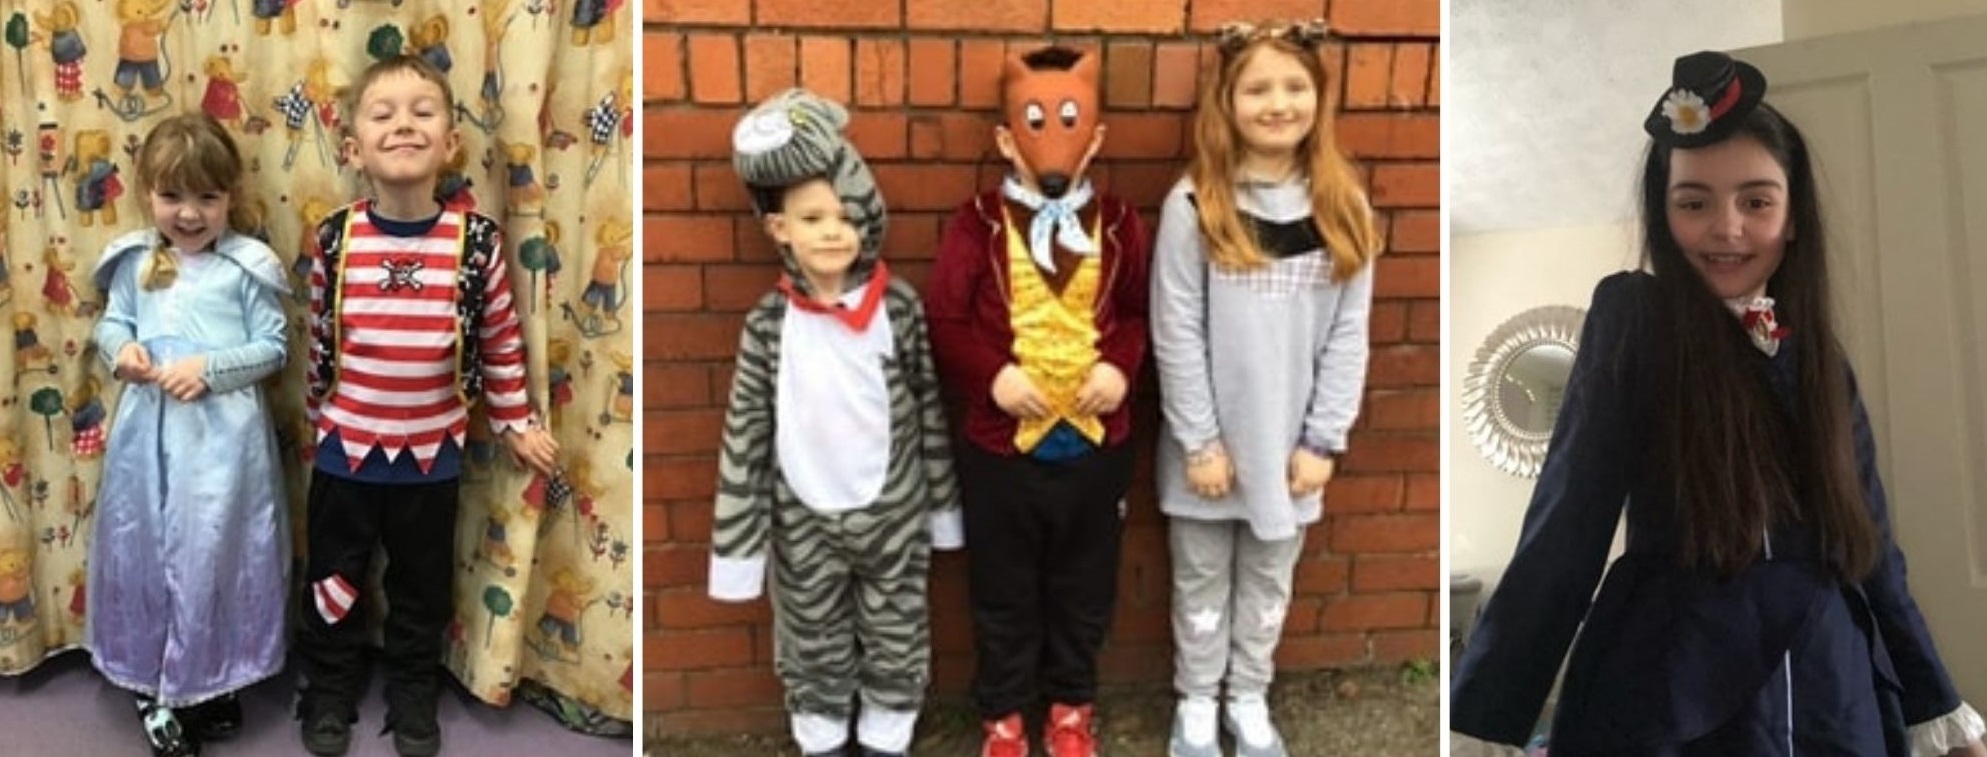 World Book Day celebrations for pupils at Rhosddu Primary School.